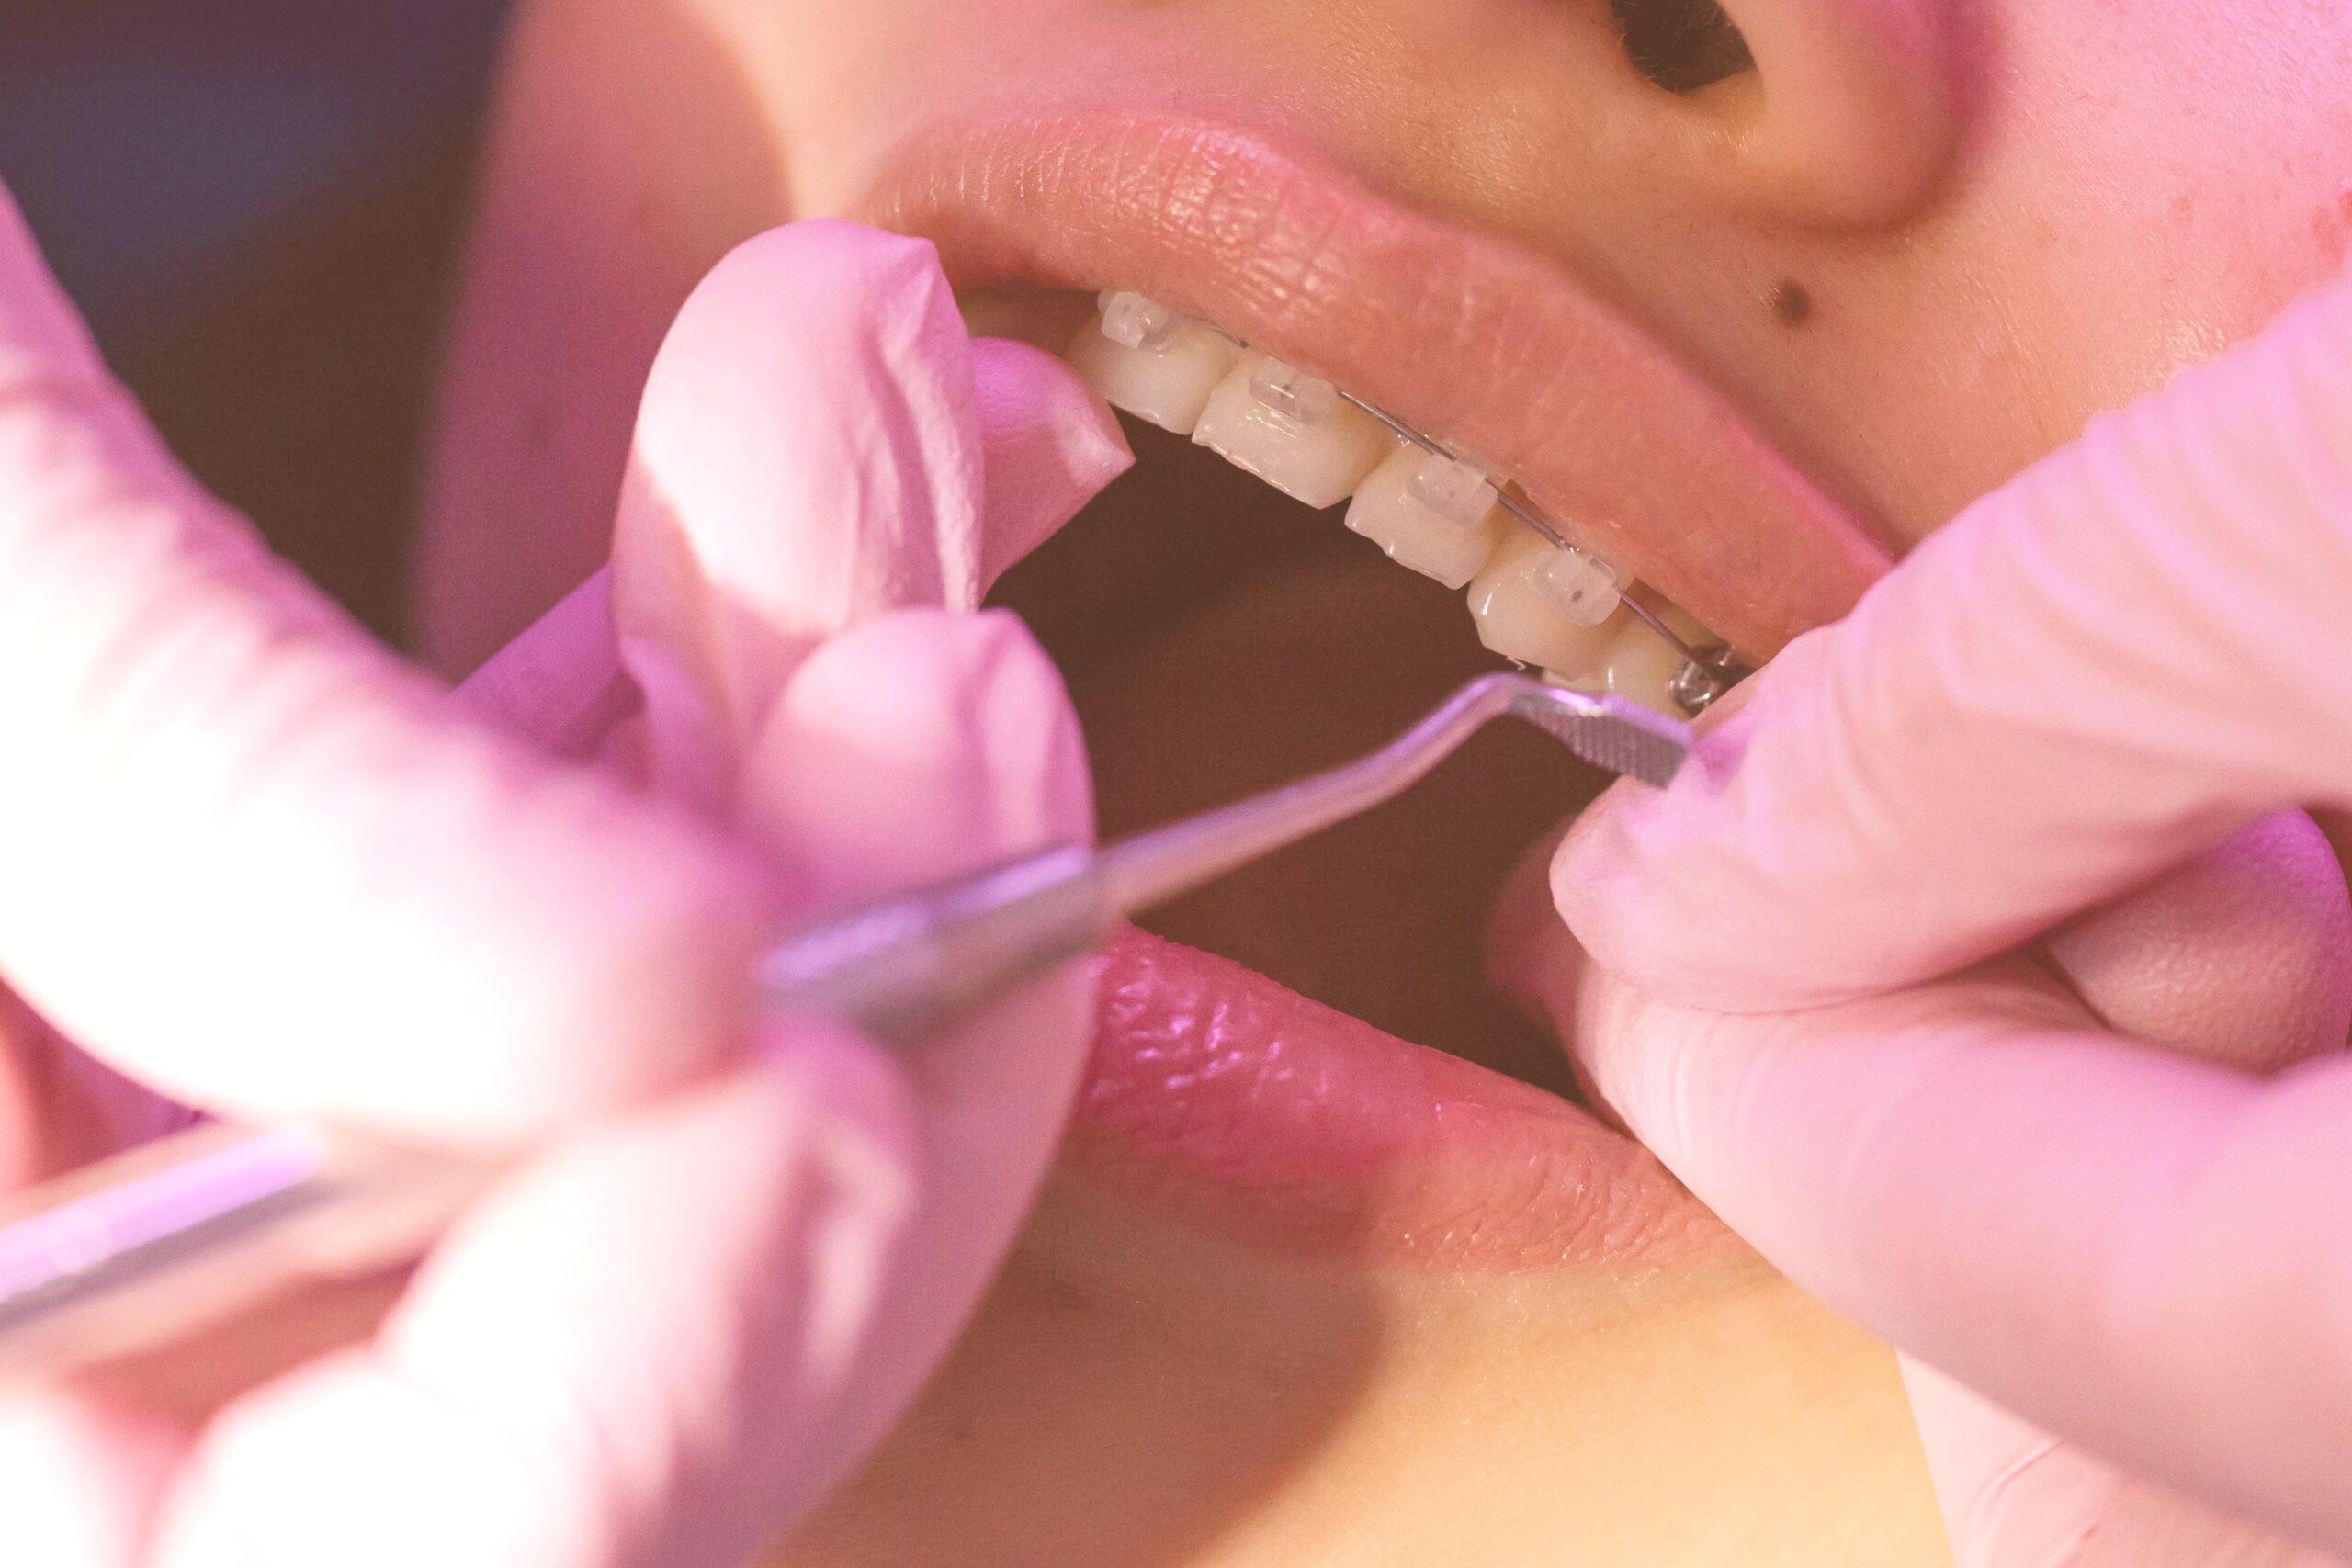 Dentist or Orthodontist for your teeth straightening needs?